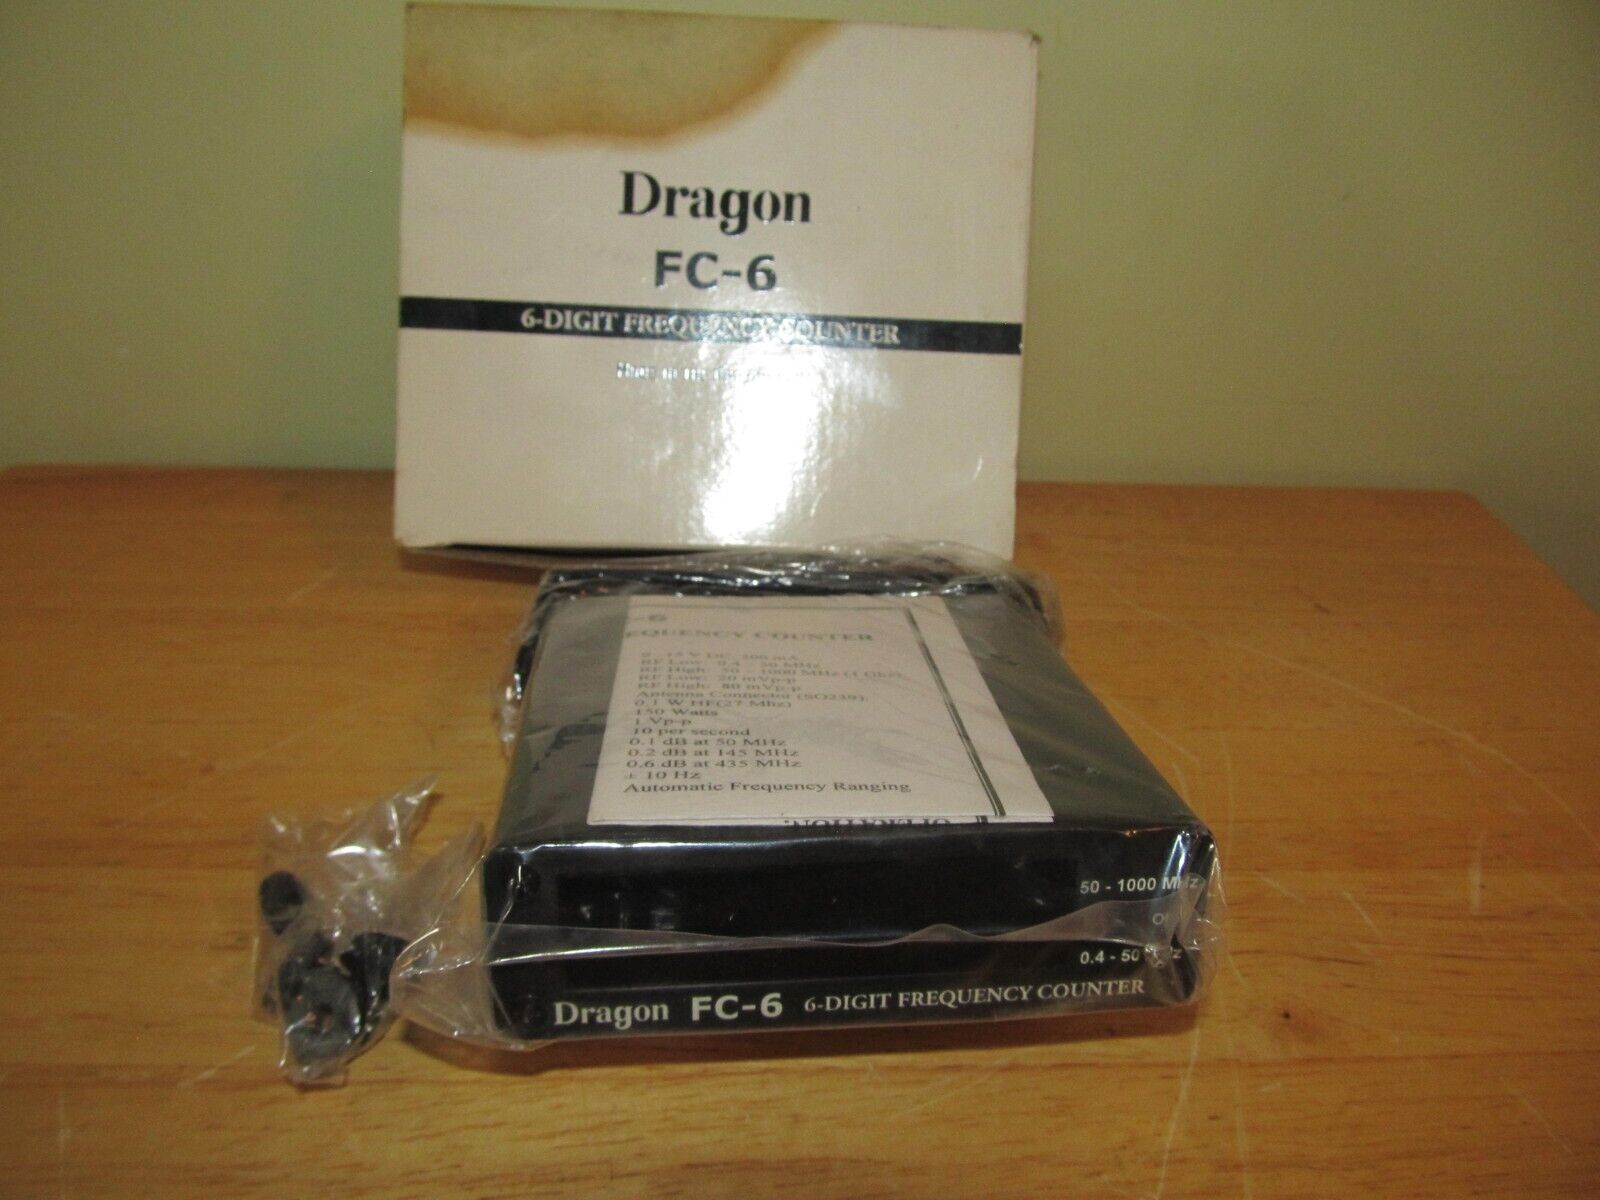 frequency counter 6-digit--dragon fc-6 new in box